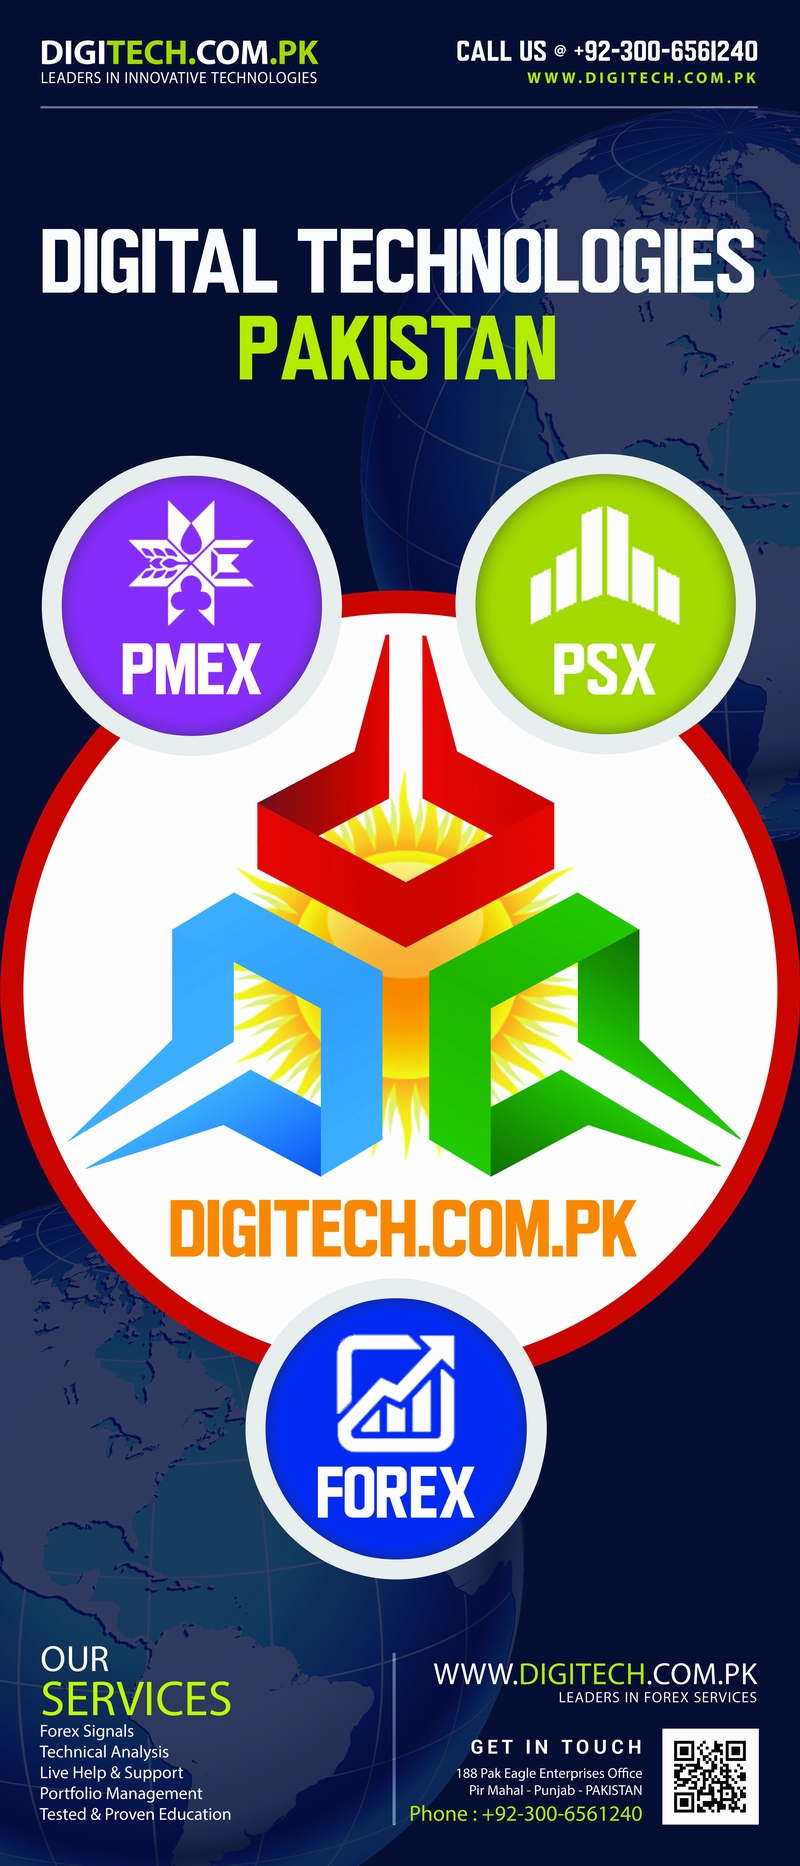 DigiTech.Com.Pk Roll Up Banner For Upcoming Forex Traders Seminar And Meetups